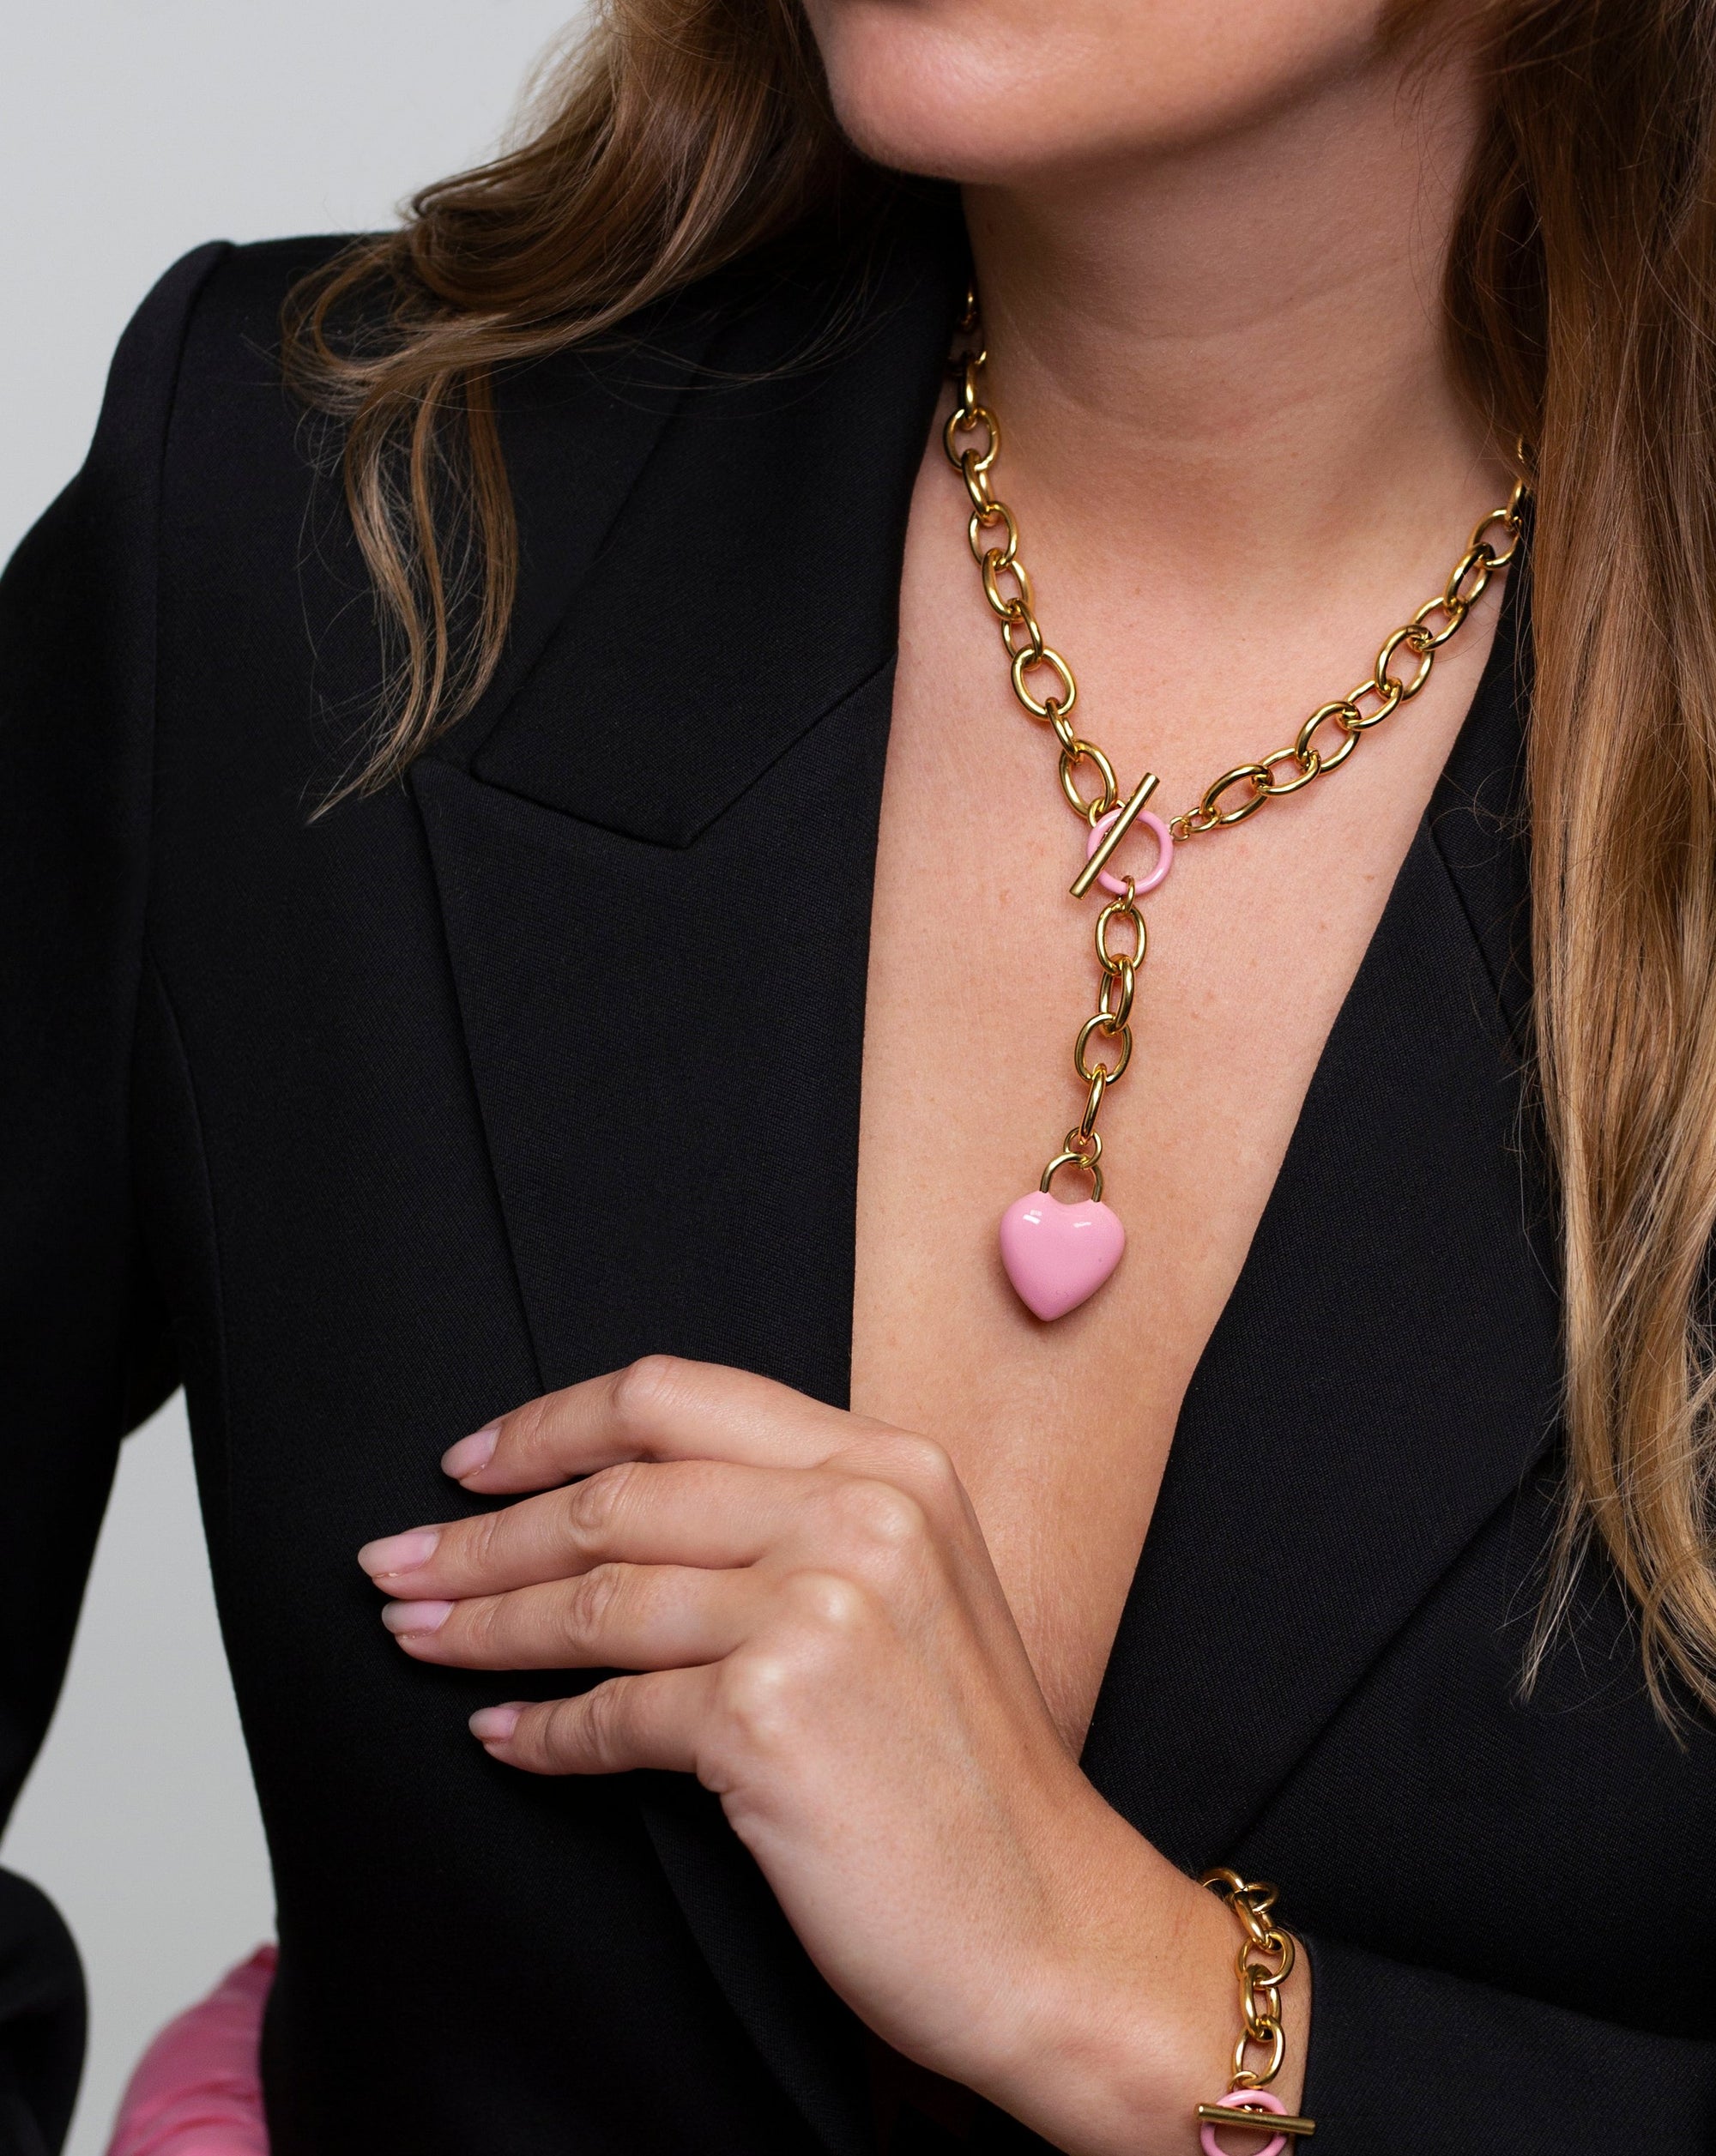 A woman wearing a black blazer is seen with The Kiss Necklace Pink from For Art's Sake®, featuring an enamel-coated heart pendant and a T-bar closure. She is also adorned with a matching gold bracelet with pink details, her hand resting gracefully on her chest.